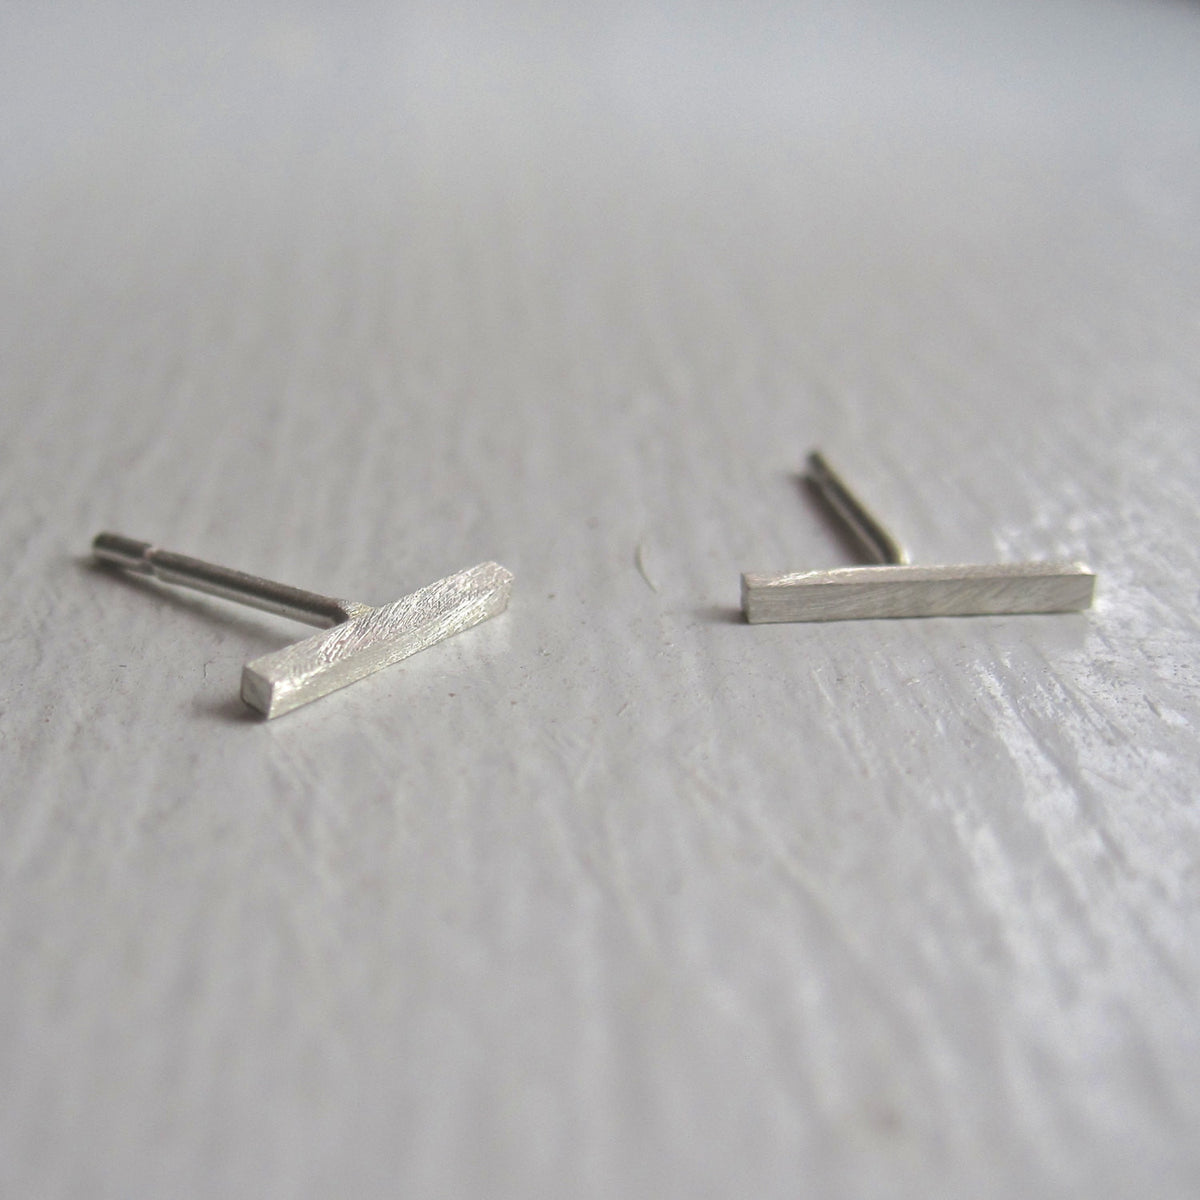 Classic Quality And Design - Sterling Silver Staple Line Stud Earrings - 0203 - Virginia Wynne Designs